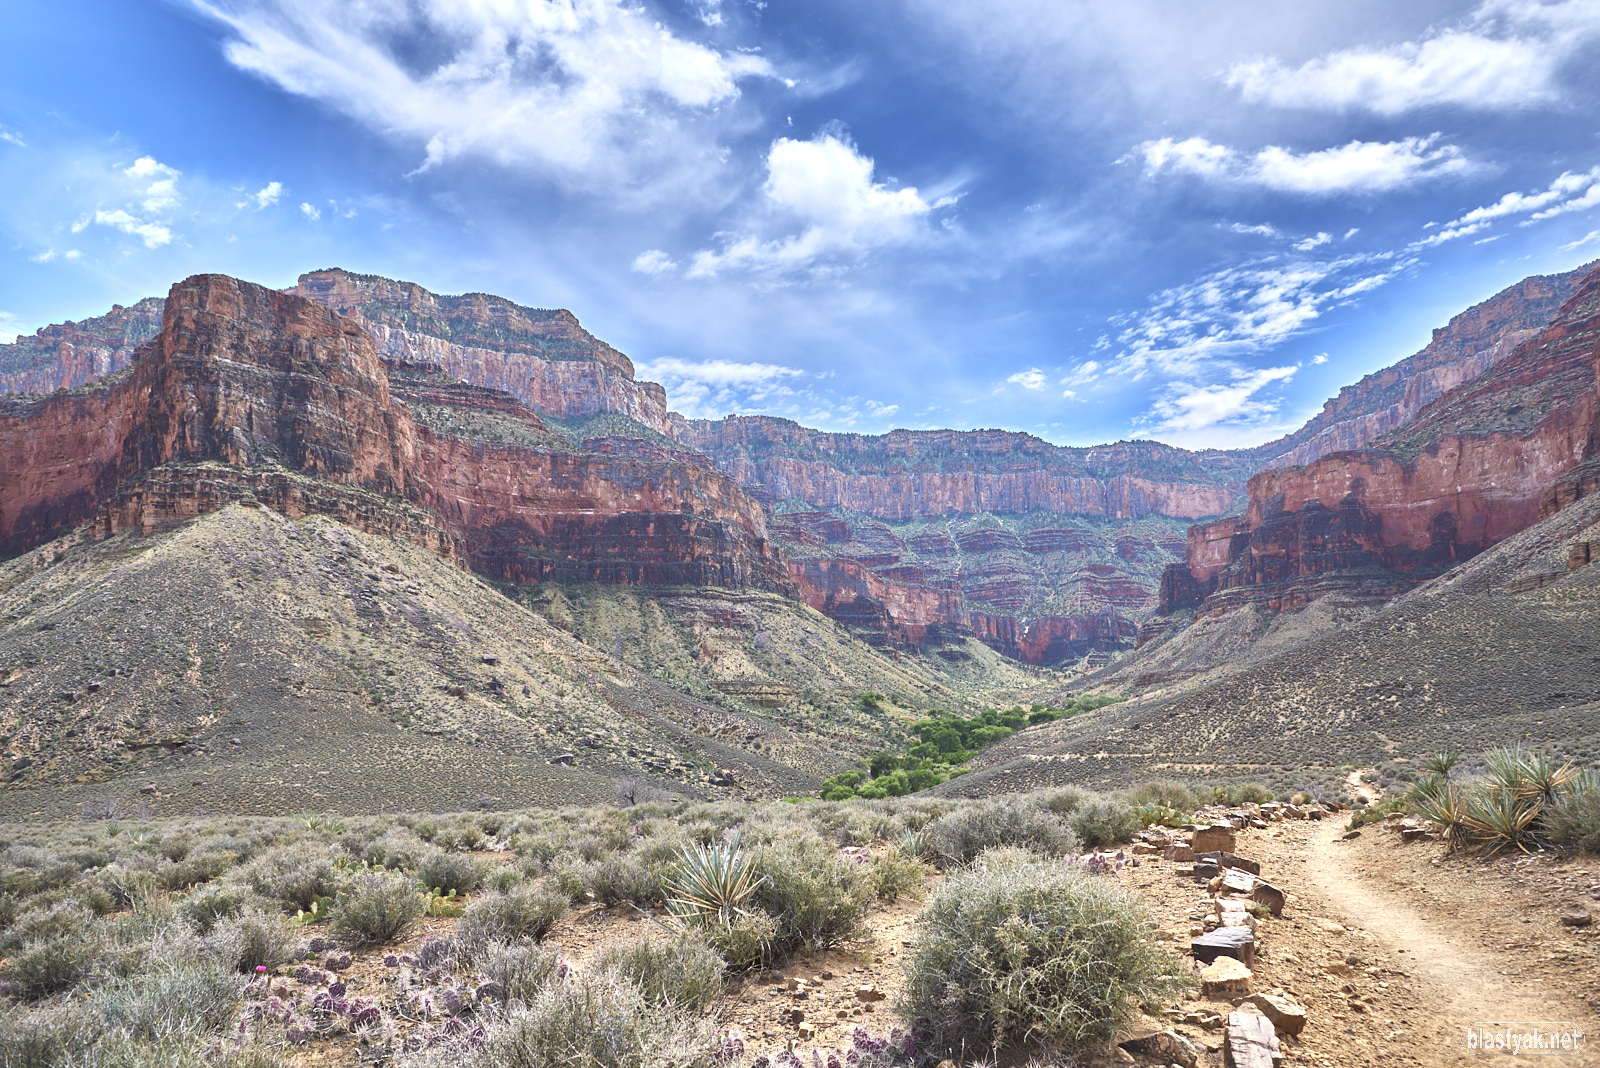 A view up the canyon towards Indian Garden Campground